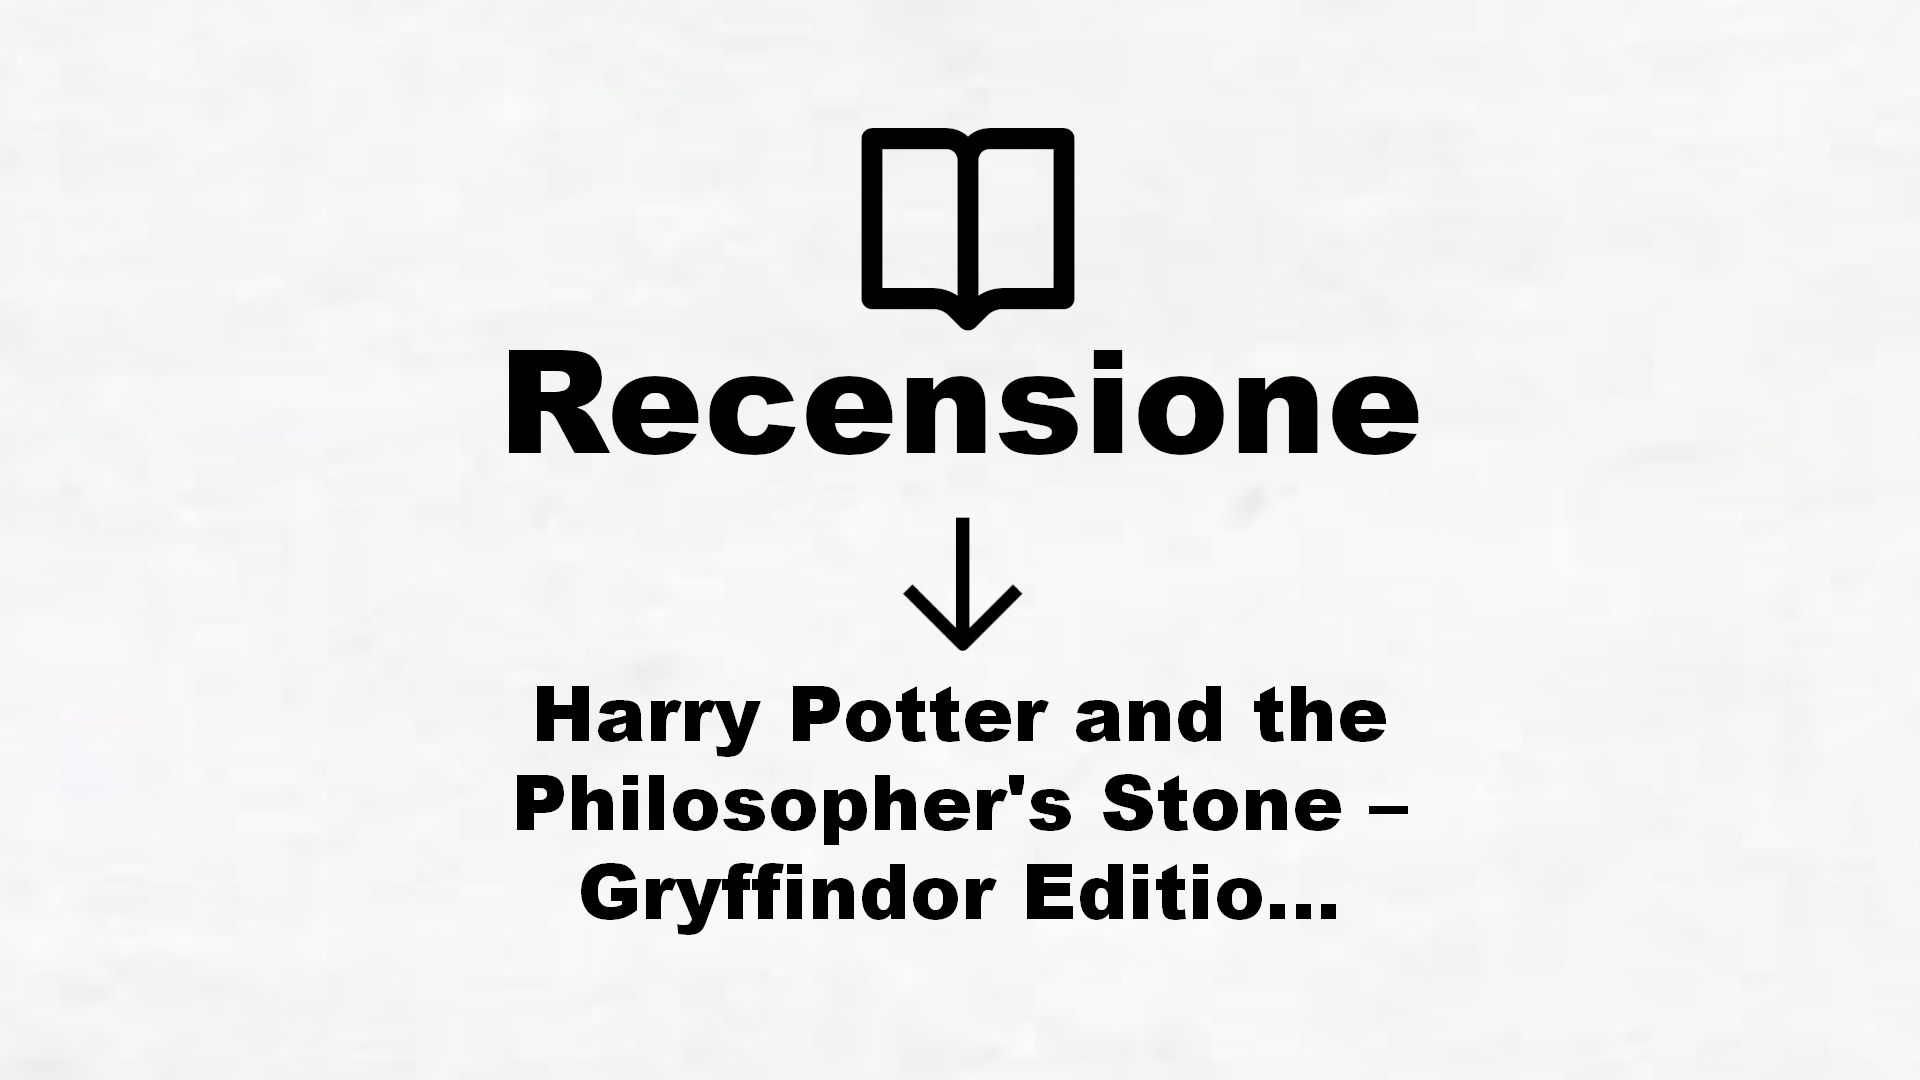 Harry Potter and the Philosopher’s Stone – Gryffindor Edition – Recensione Libro